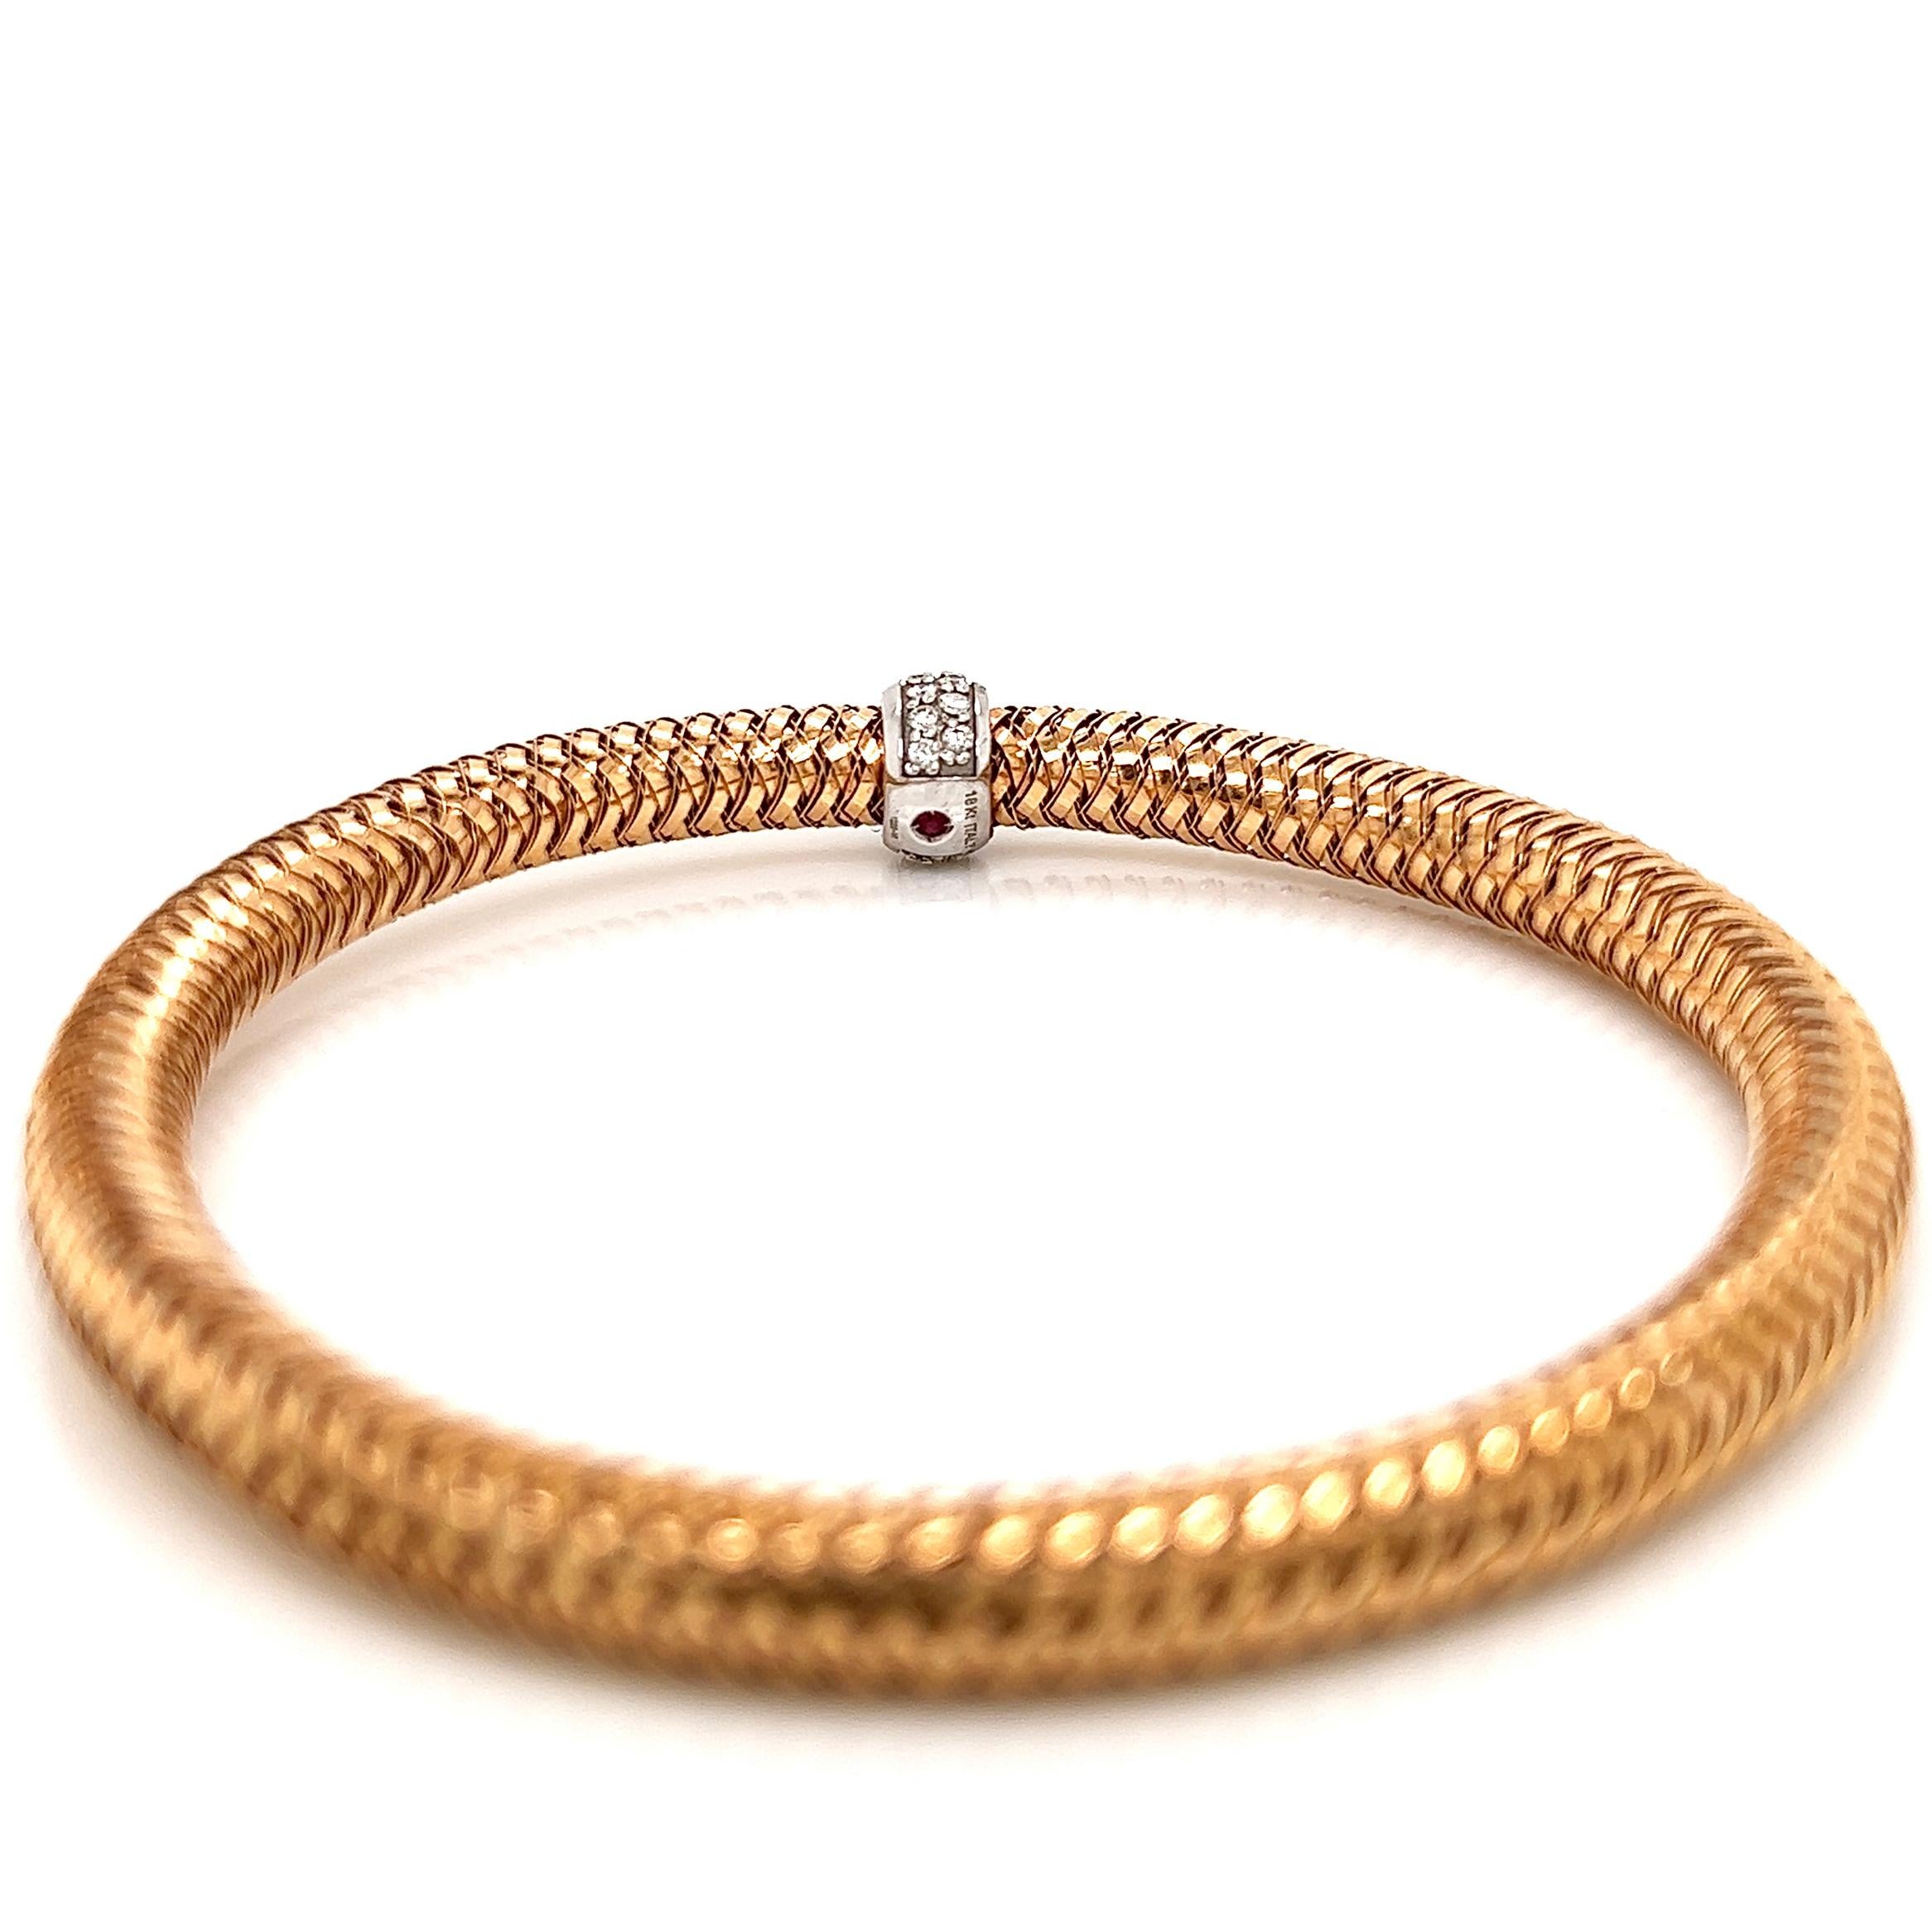 Roberto Coin 18K Rose Gold Primavera Diamond Station Flexible Bracelet.
Size is adjustable up to 7.75 inches
Approx. .22 total carat weight of natural Diamonds